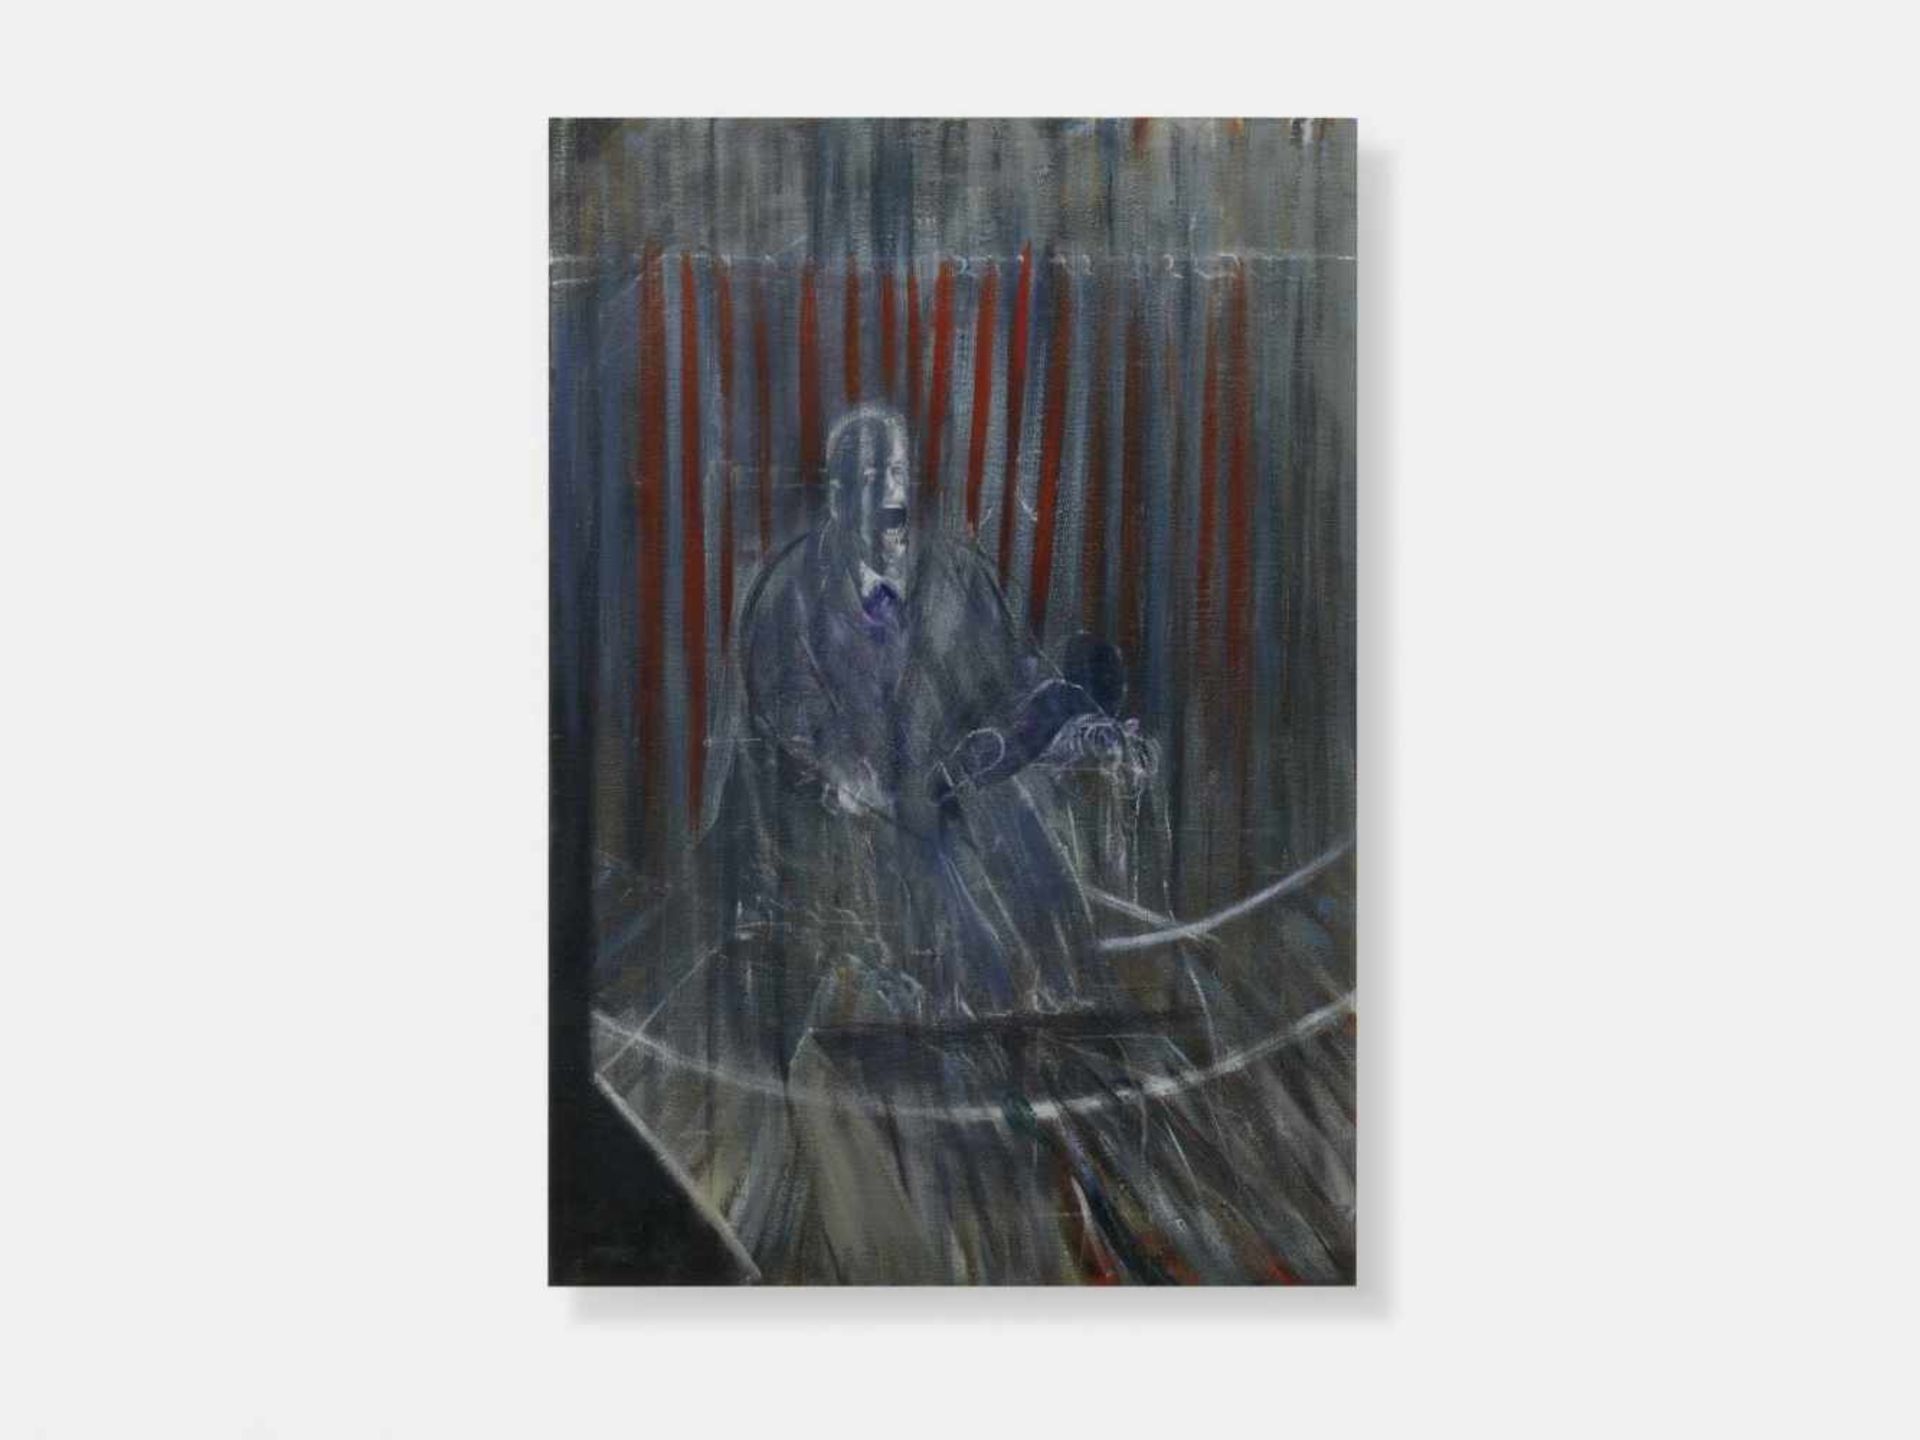 Francis Bacon (after) - Study after VelazquezFrancis Bacon (after) - Study after VelazquezGiclée